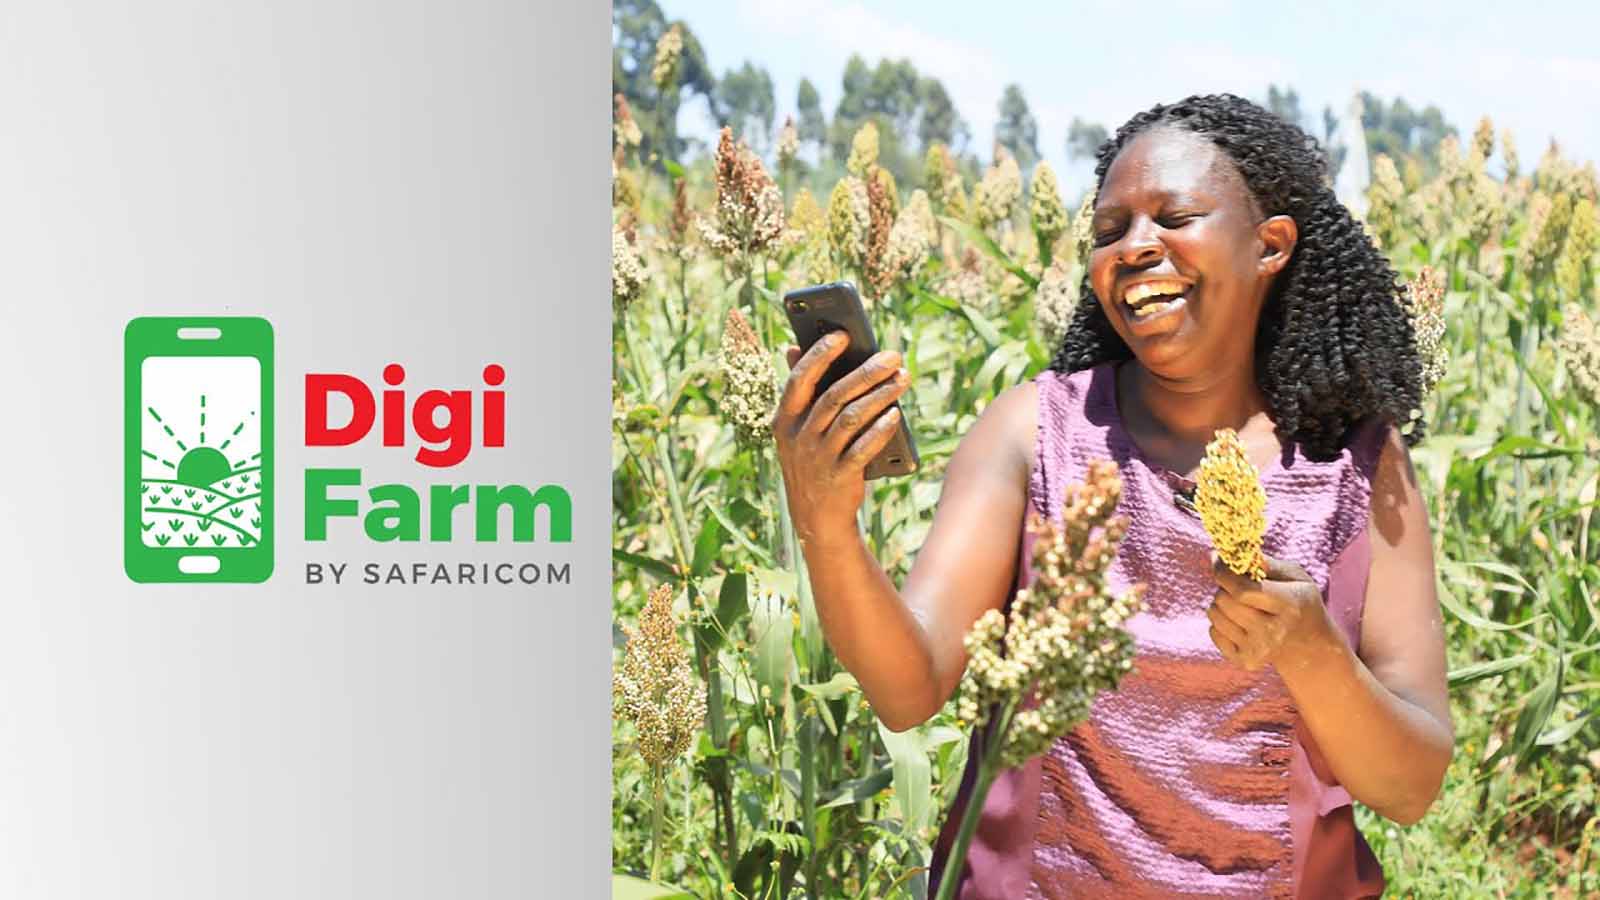 NCPB partners with Safaricom’s integrated mobile platform DigiFarm to enable farmers access post-harvest services